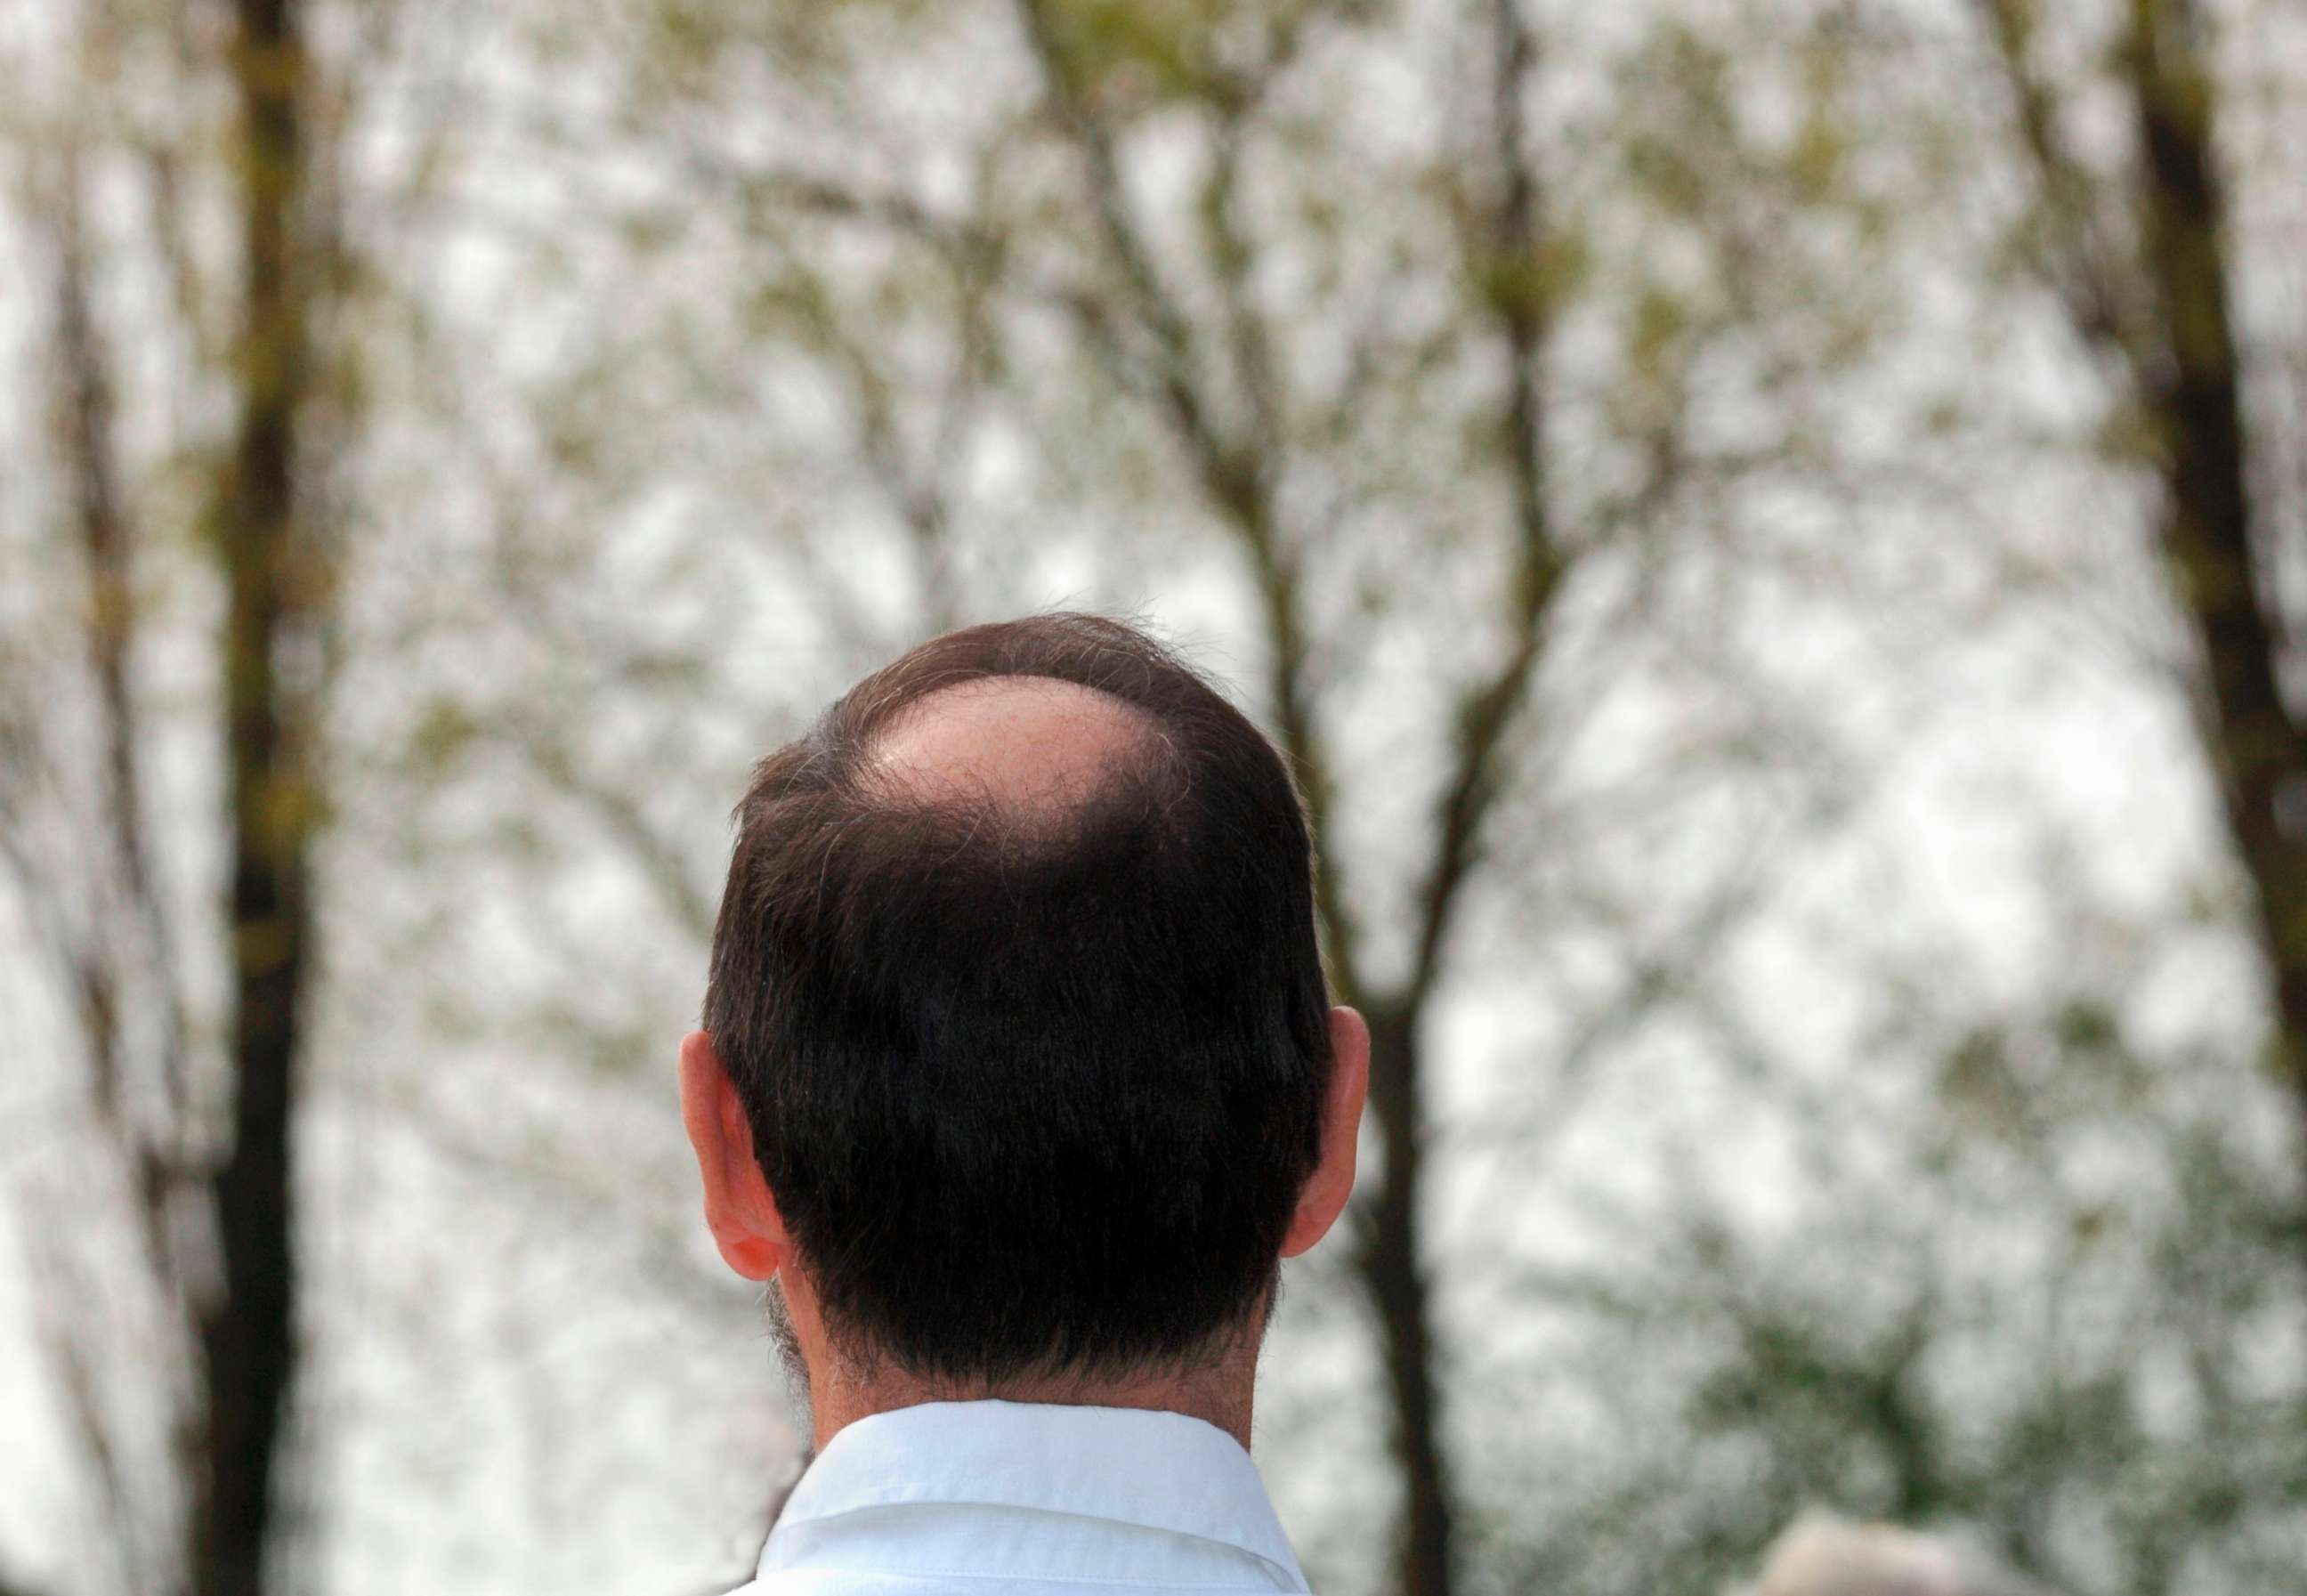 PHOTO: This stock photo depicts a balding man.